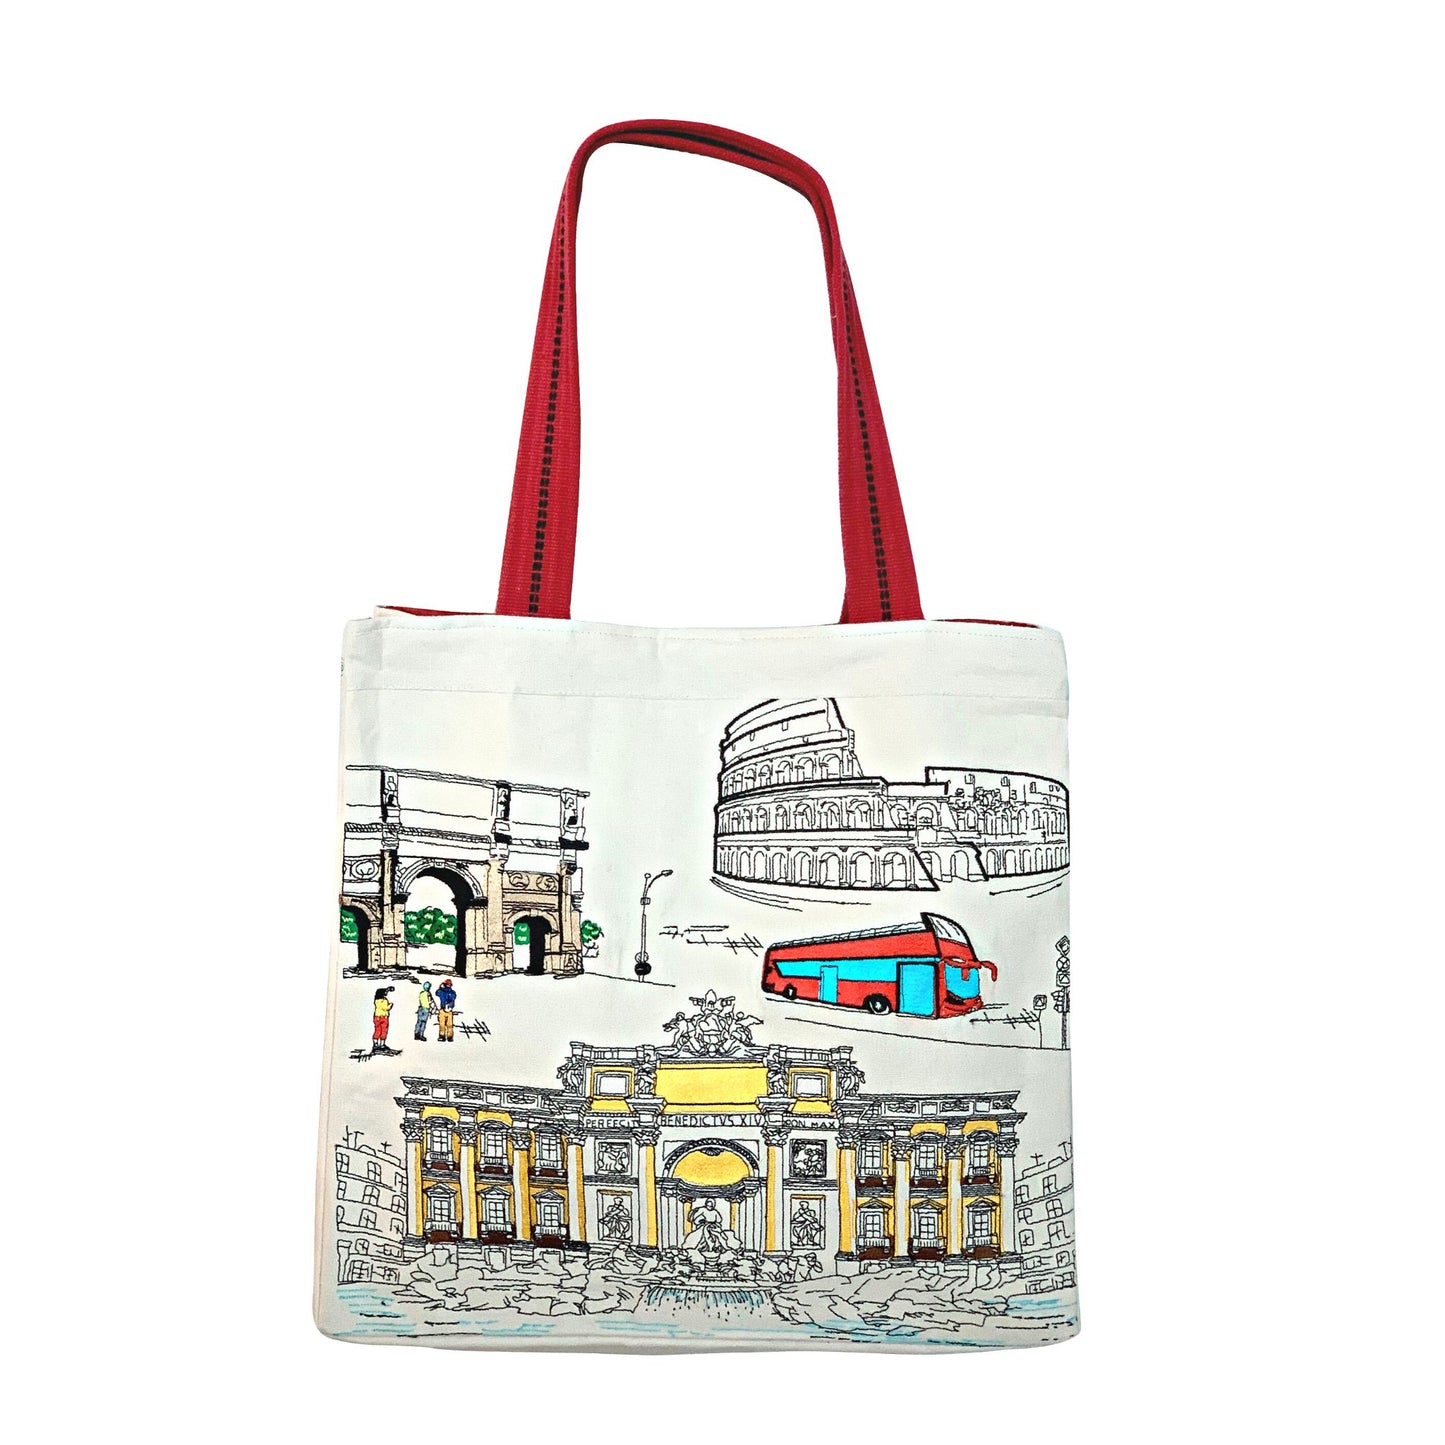 Embroidered City Artistry Collection Tote Bag - Rome